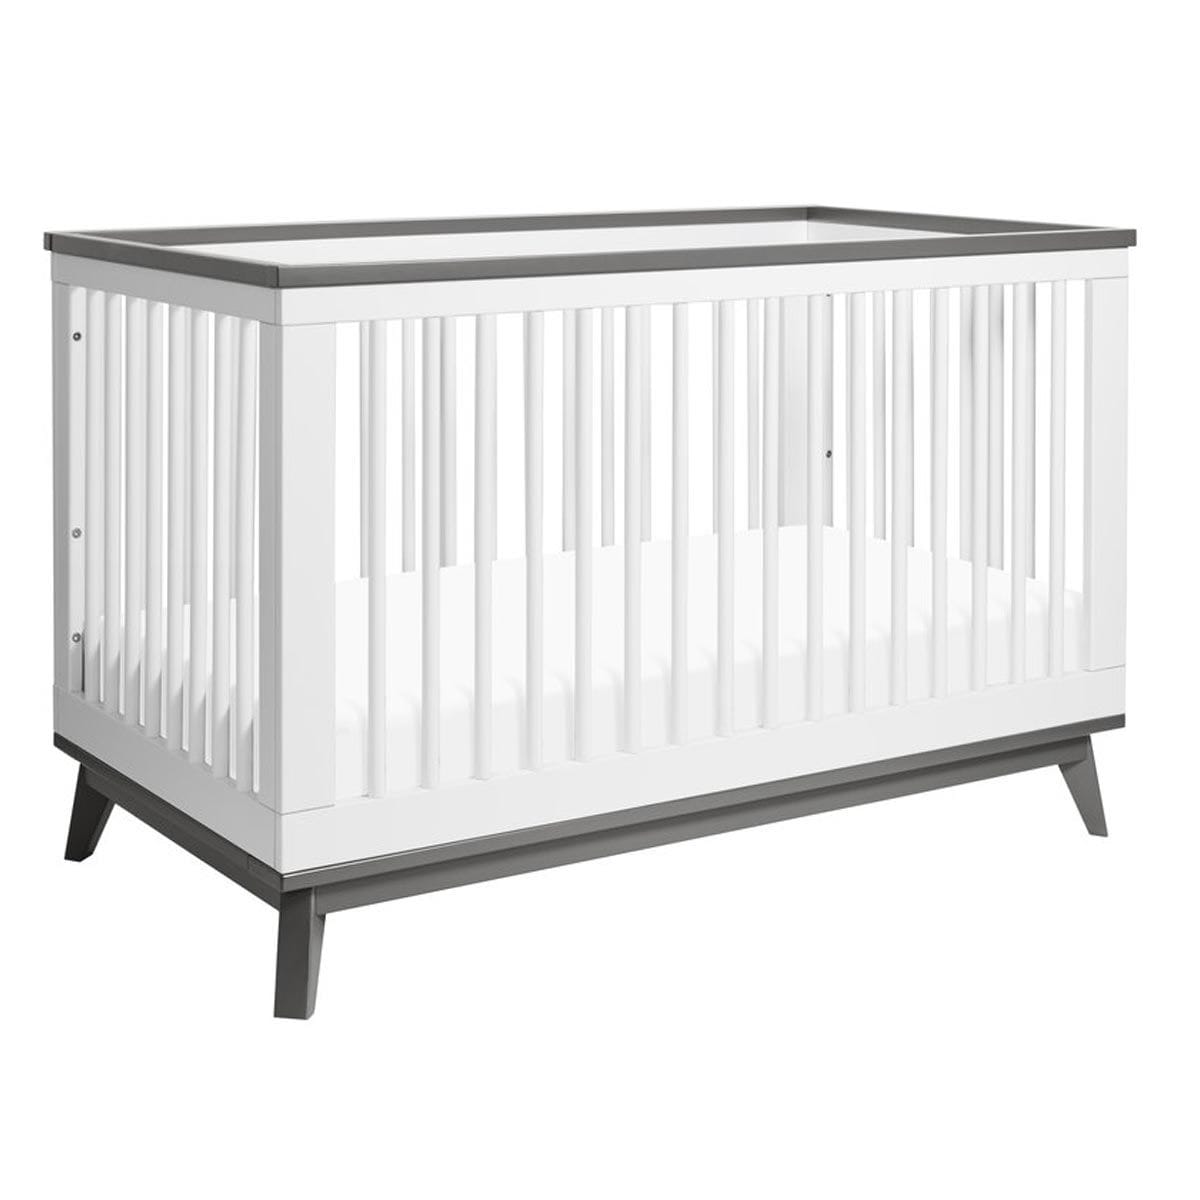 Babyletto crib White and Slate - Babyletto Scoot Crib Babyletto Scoot 3-in-1 Convertible Crib